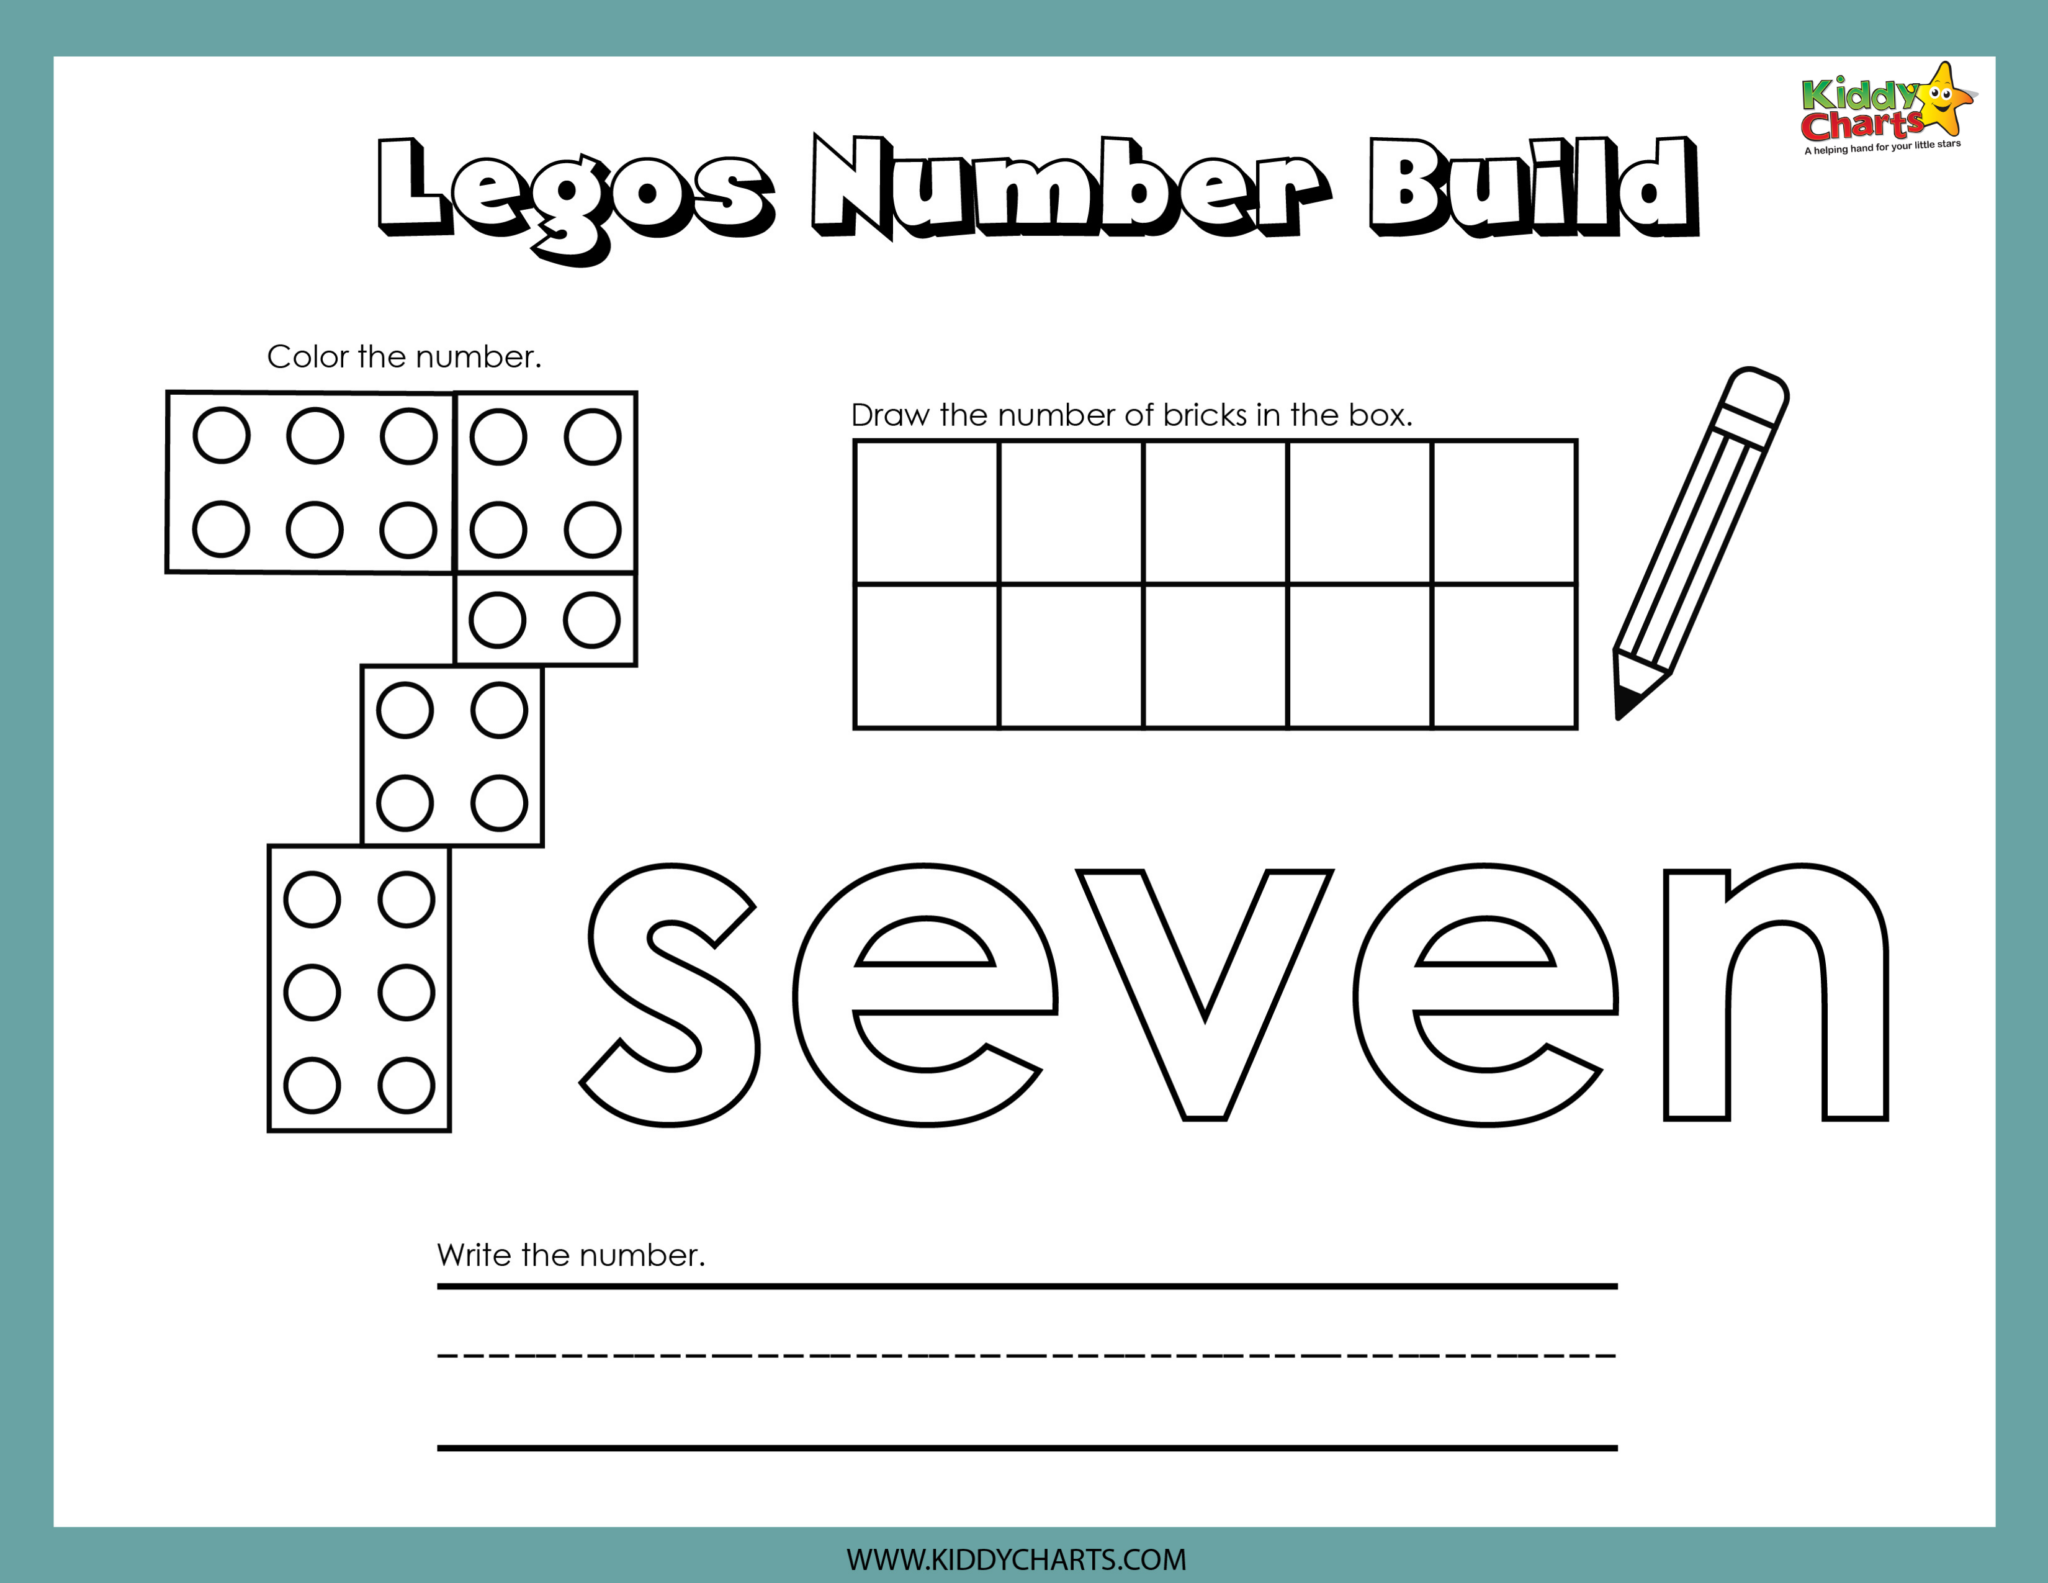 lego-numbers-building-activity-printable-maths-kiddycharts